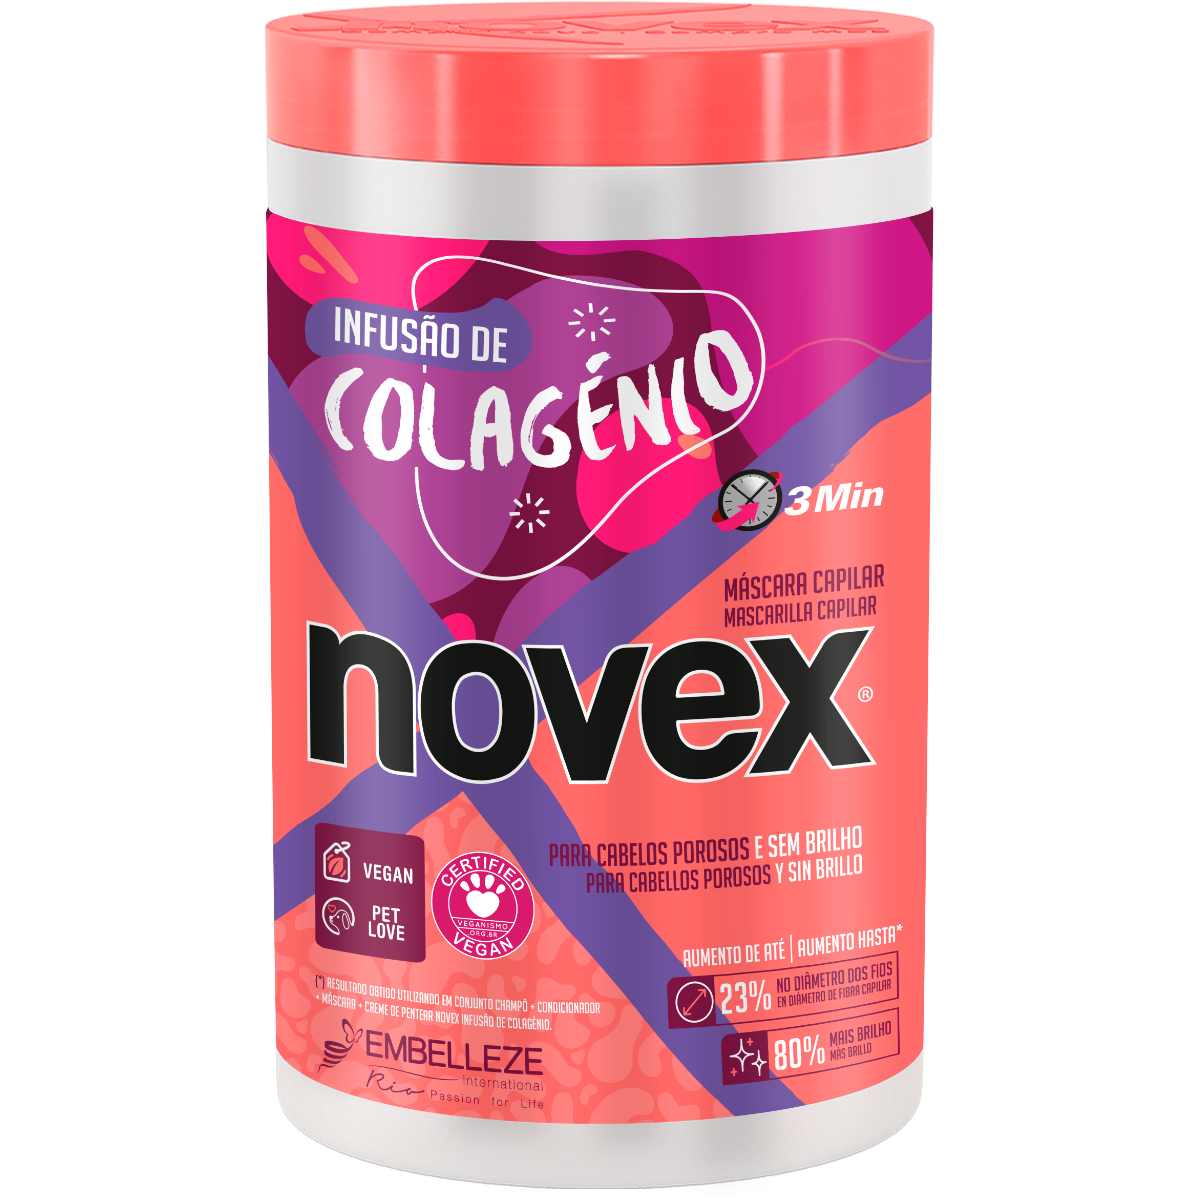 Novex Collagen Infusion Hair Mask 400 ml